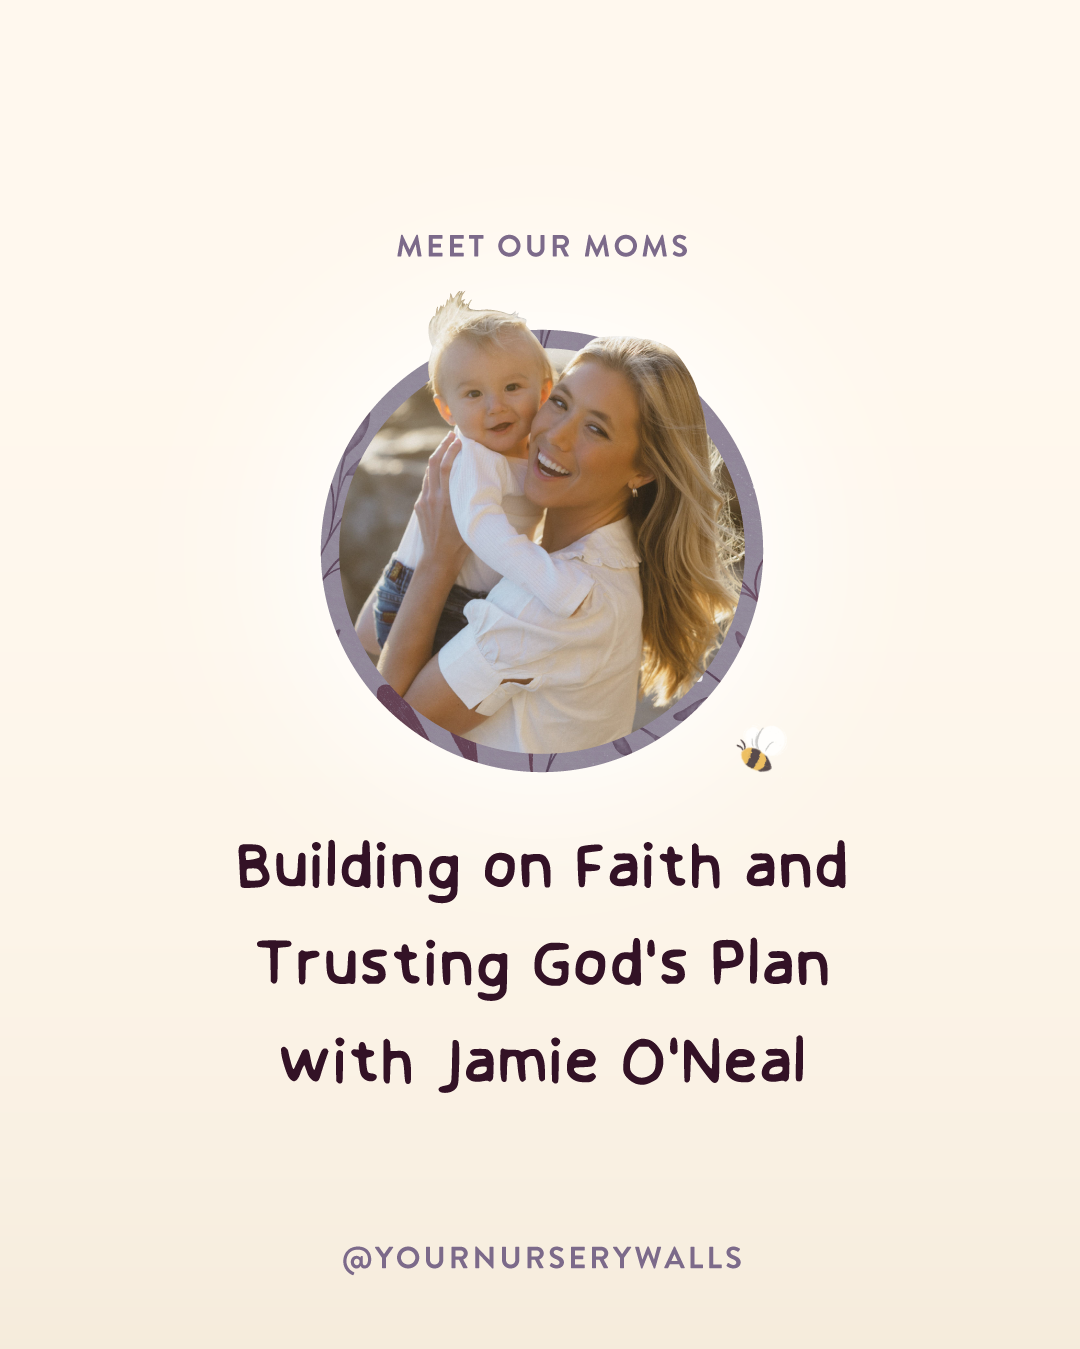 Your Nursery Walls interview with Jamie O'Neal on building on faith and trusting God's plan in motherhood.